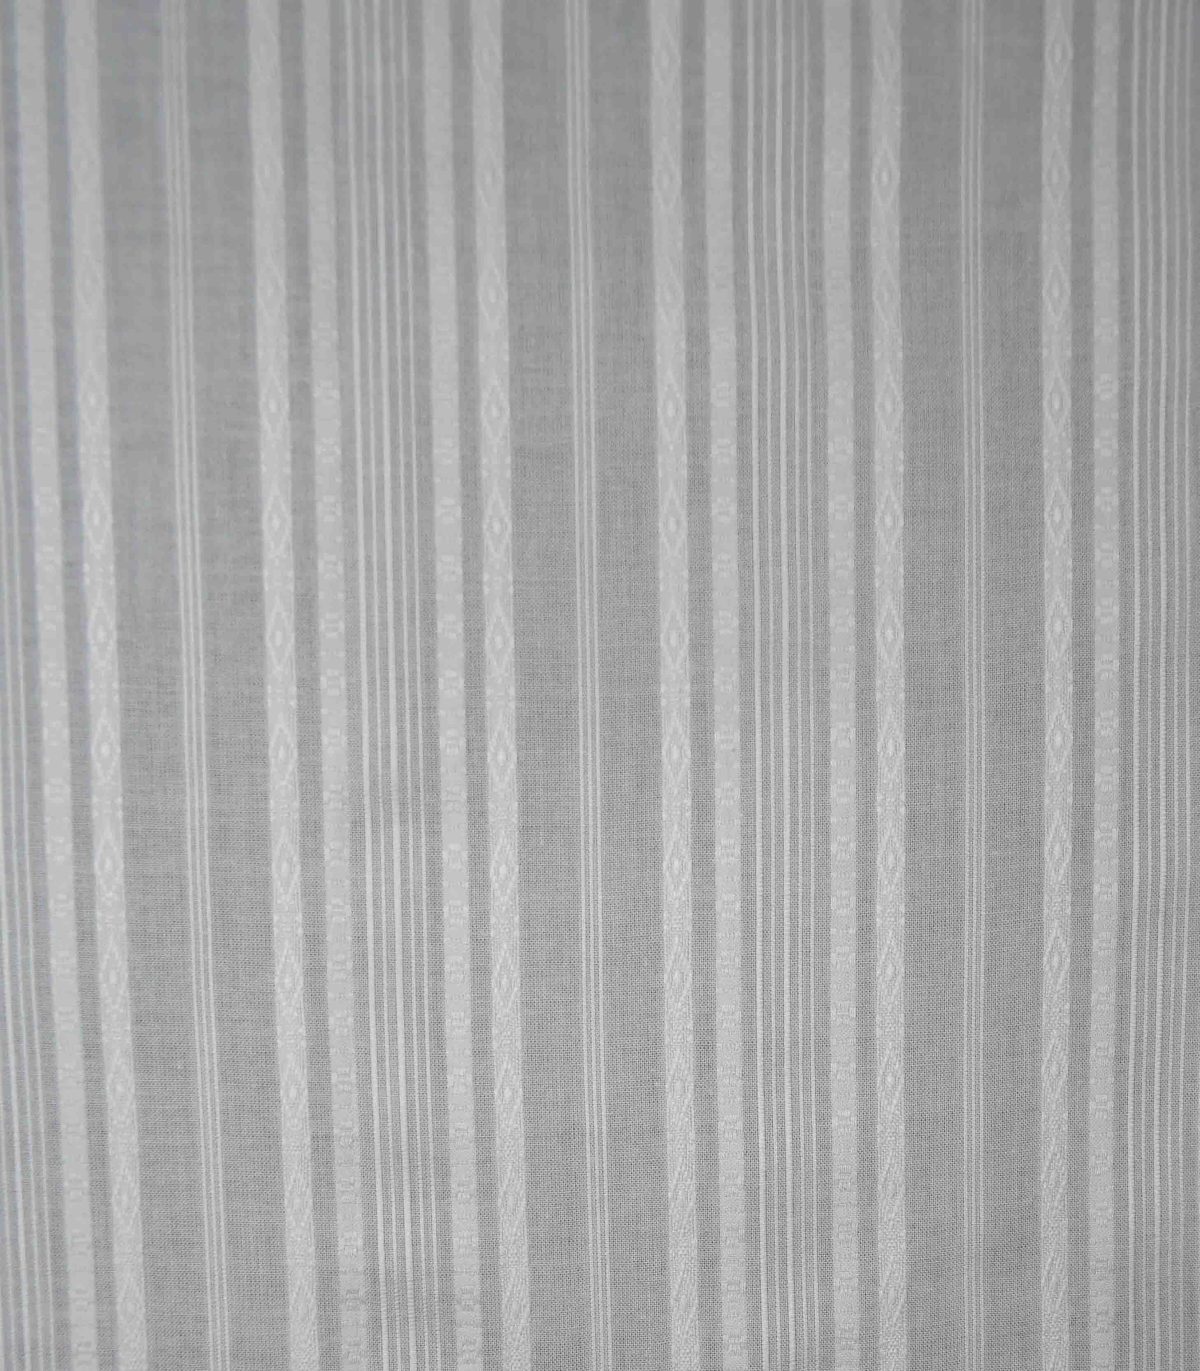 Cotton RFD Dobby Woven Fabric